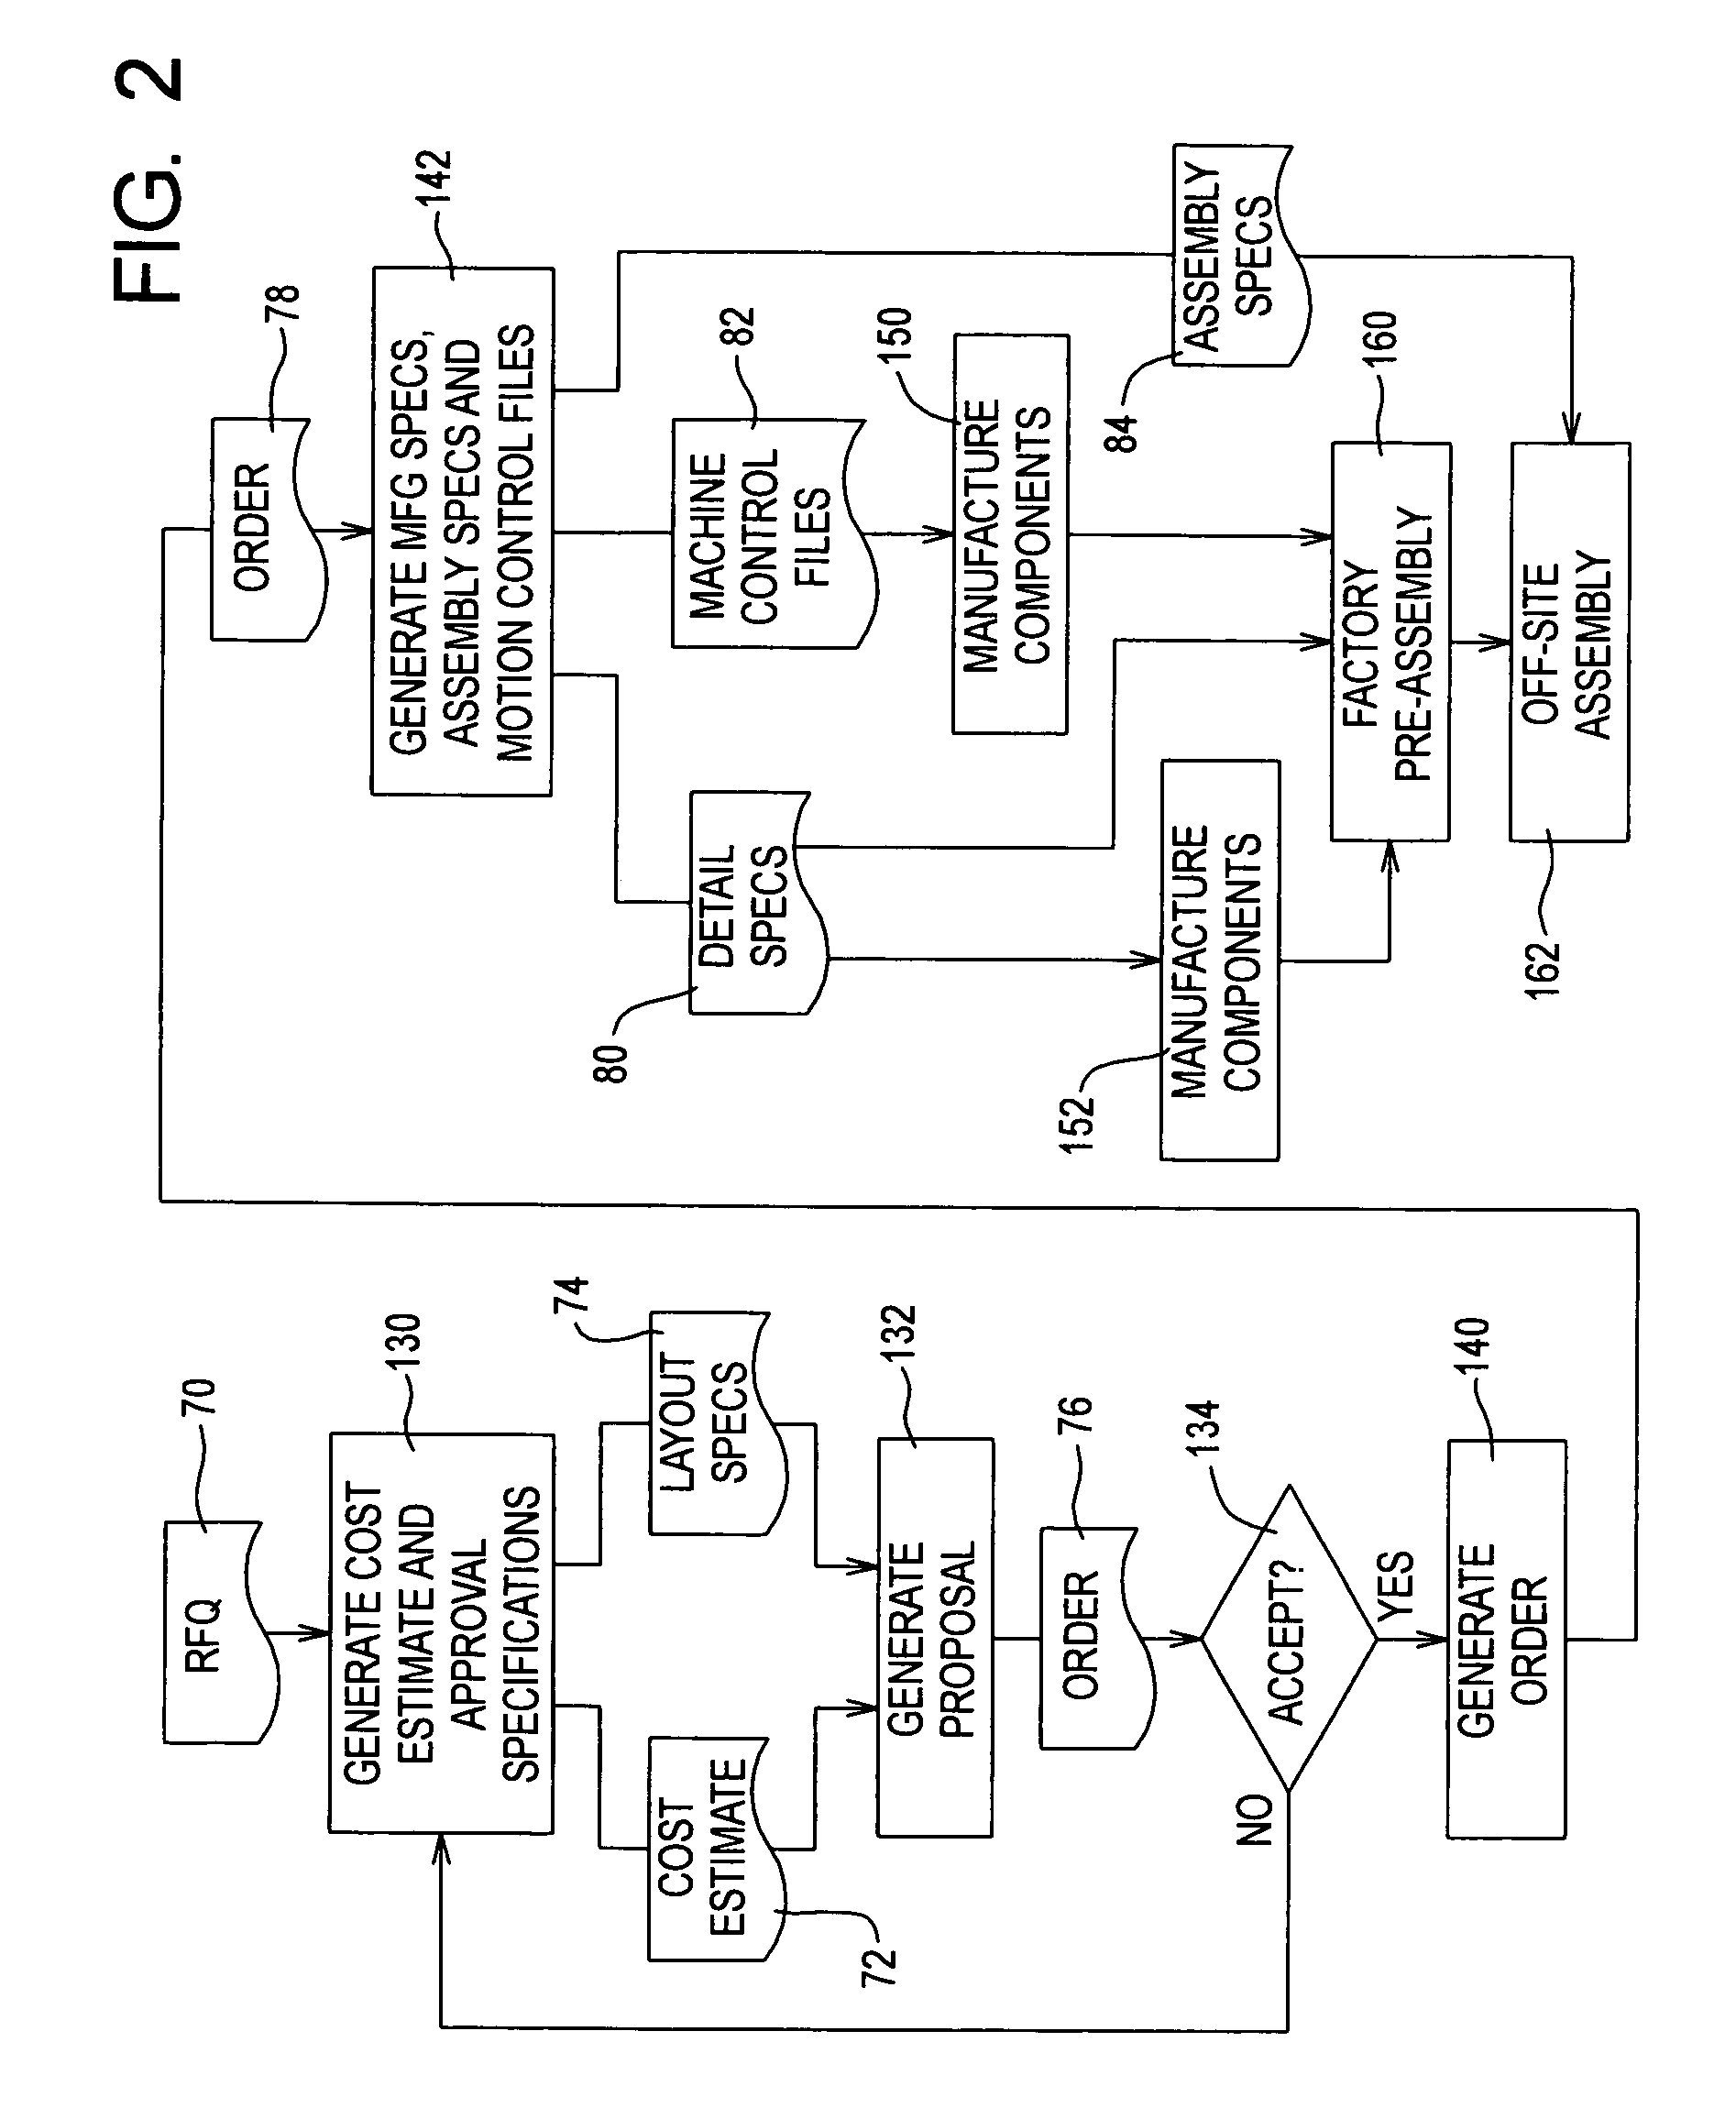 Systems and methods for designing and manufacturing engineered objects